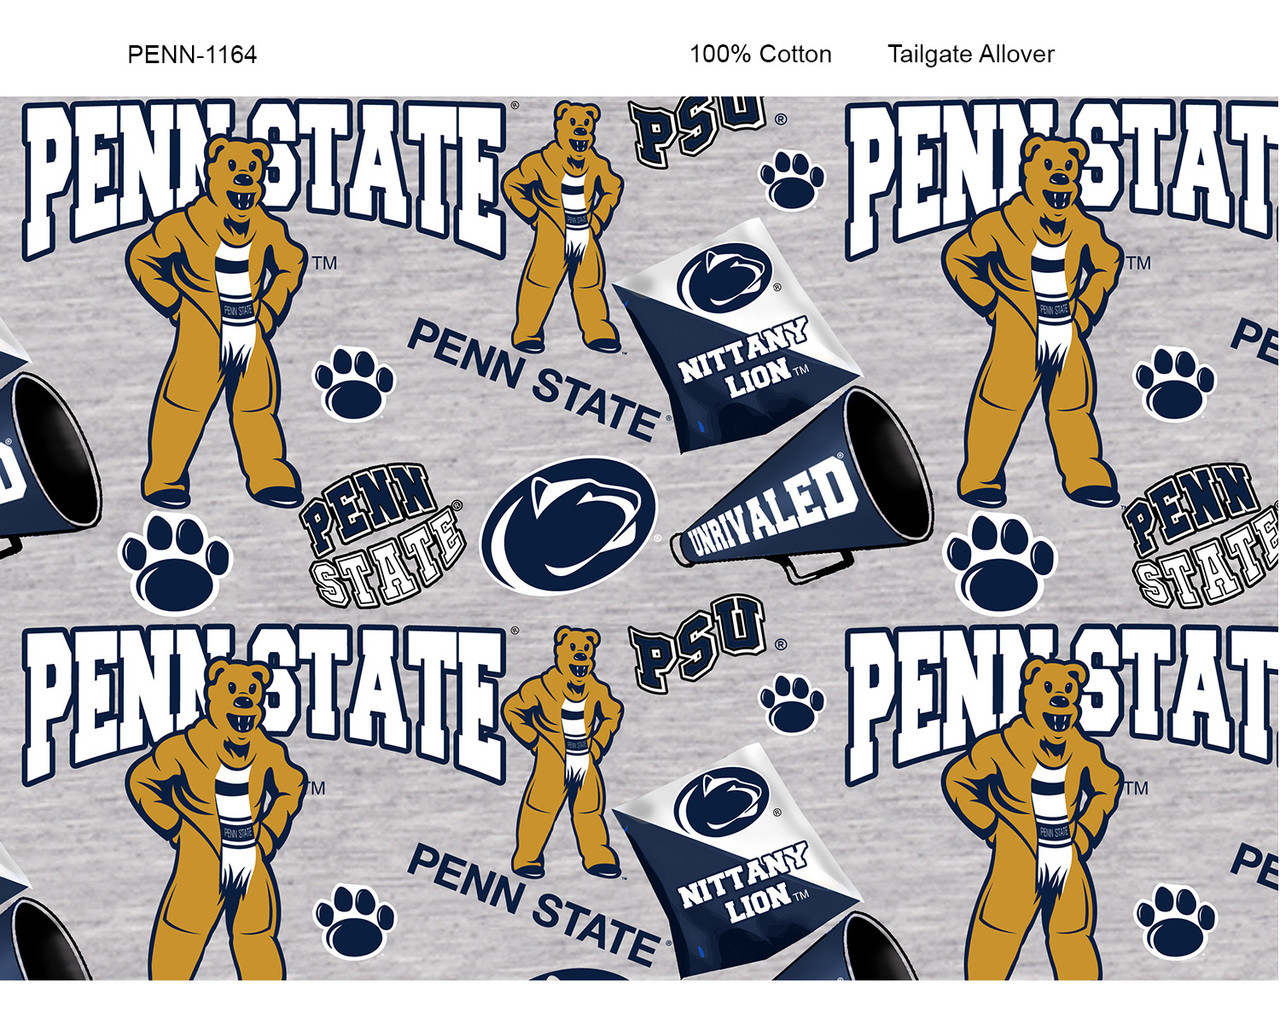 Penn State Nittany Lions Cotton Fabric with Mascot Heather Print or Matching Solid Cotton Fabrics